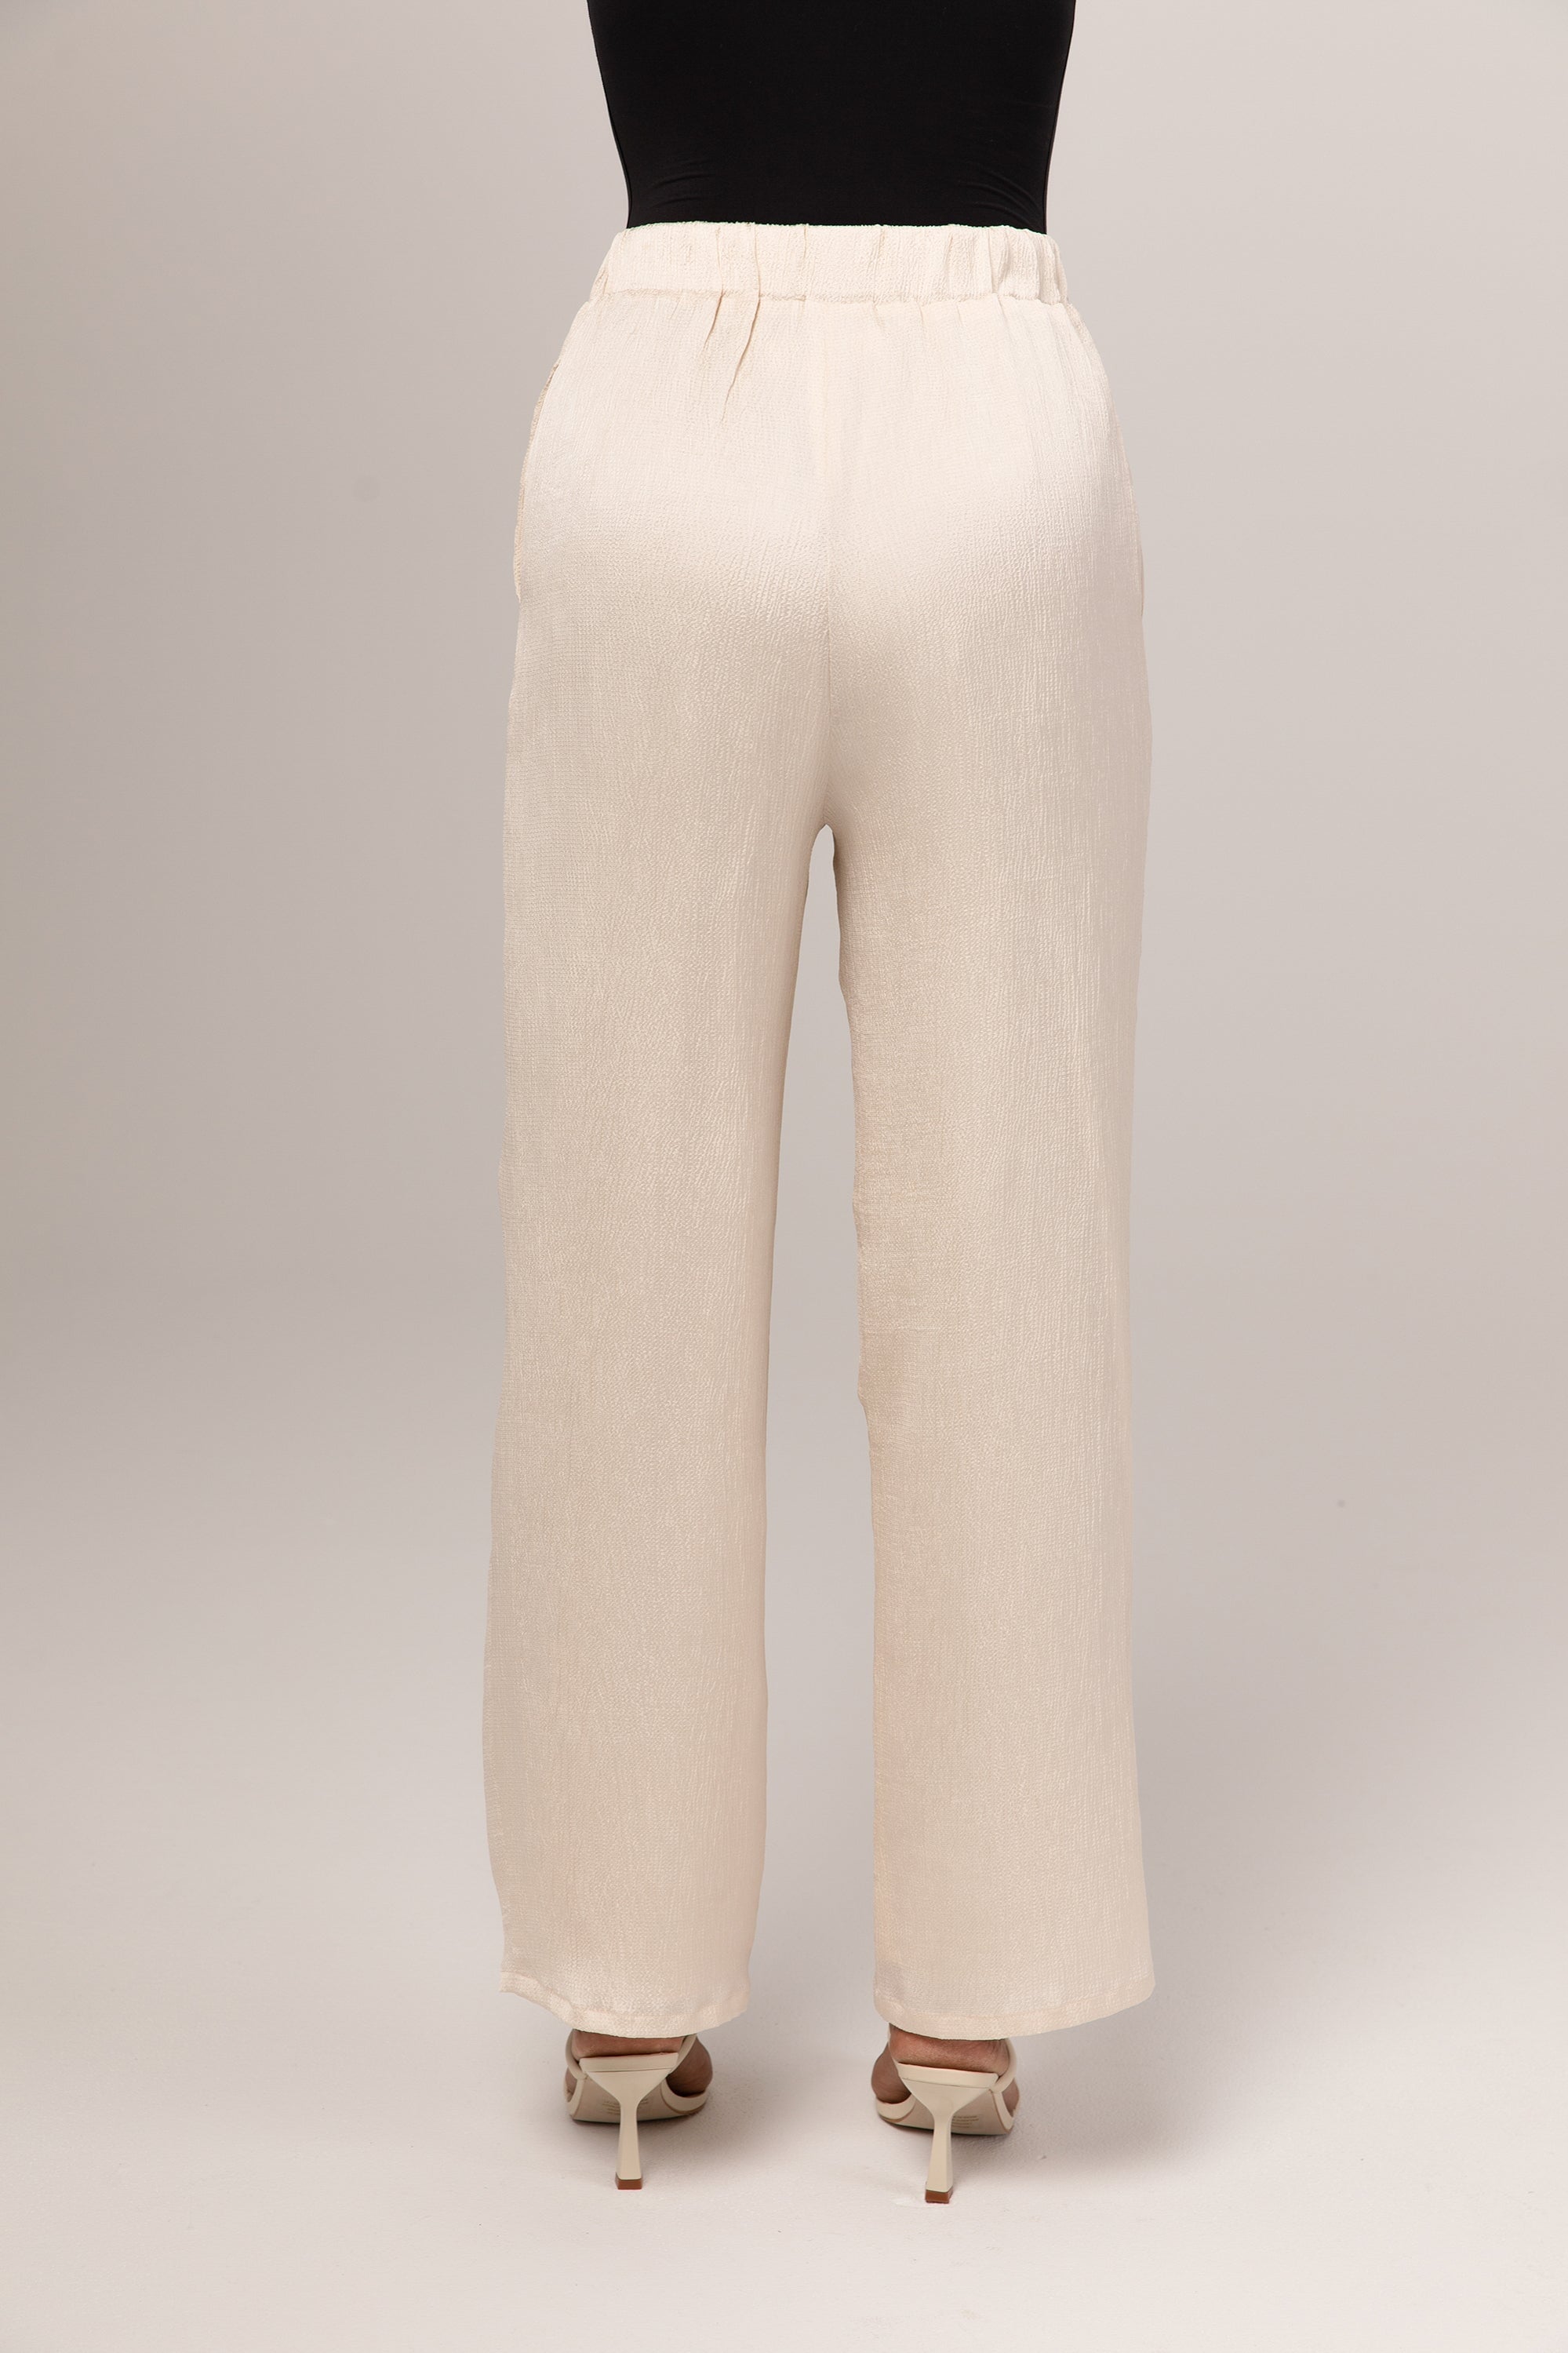 Katia Textured Wide Leg Pants - Ivory Veiled Collection 